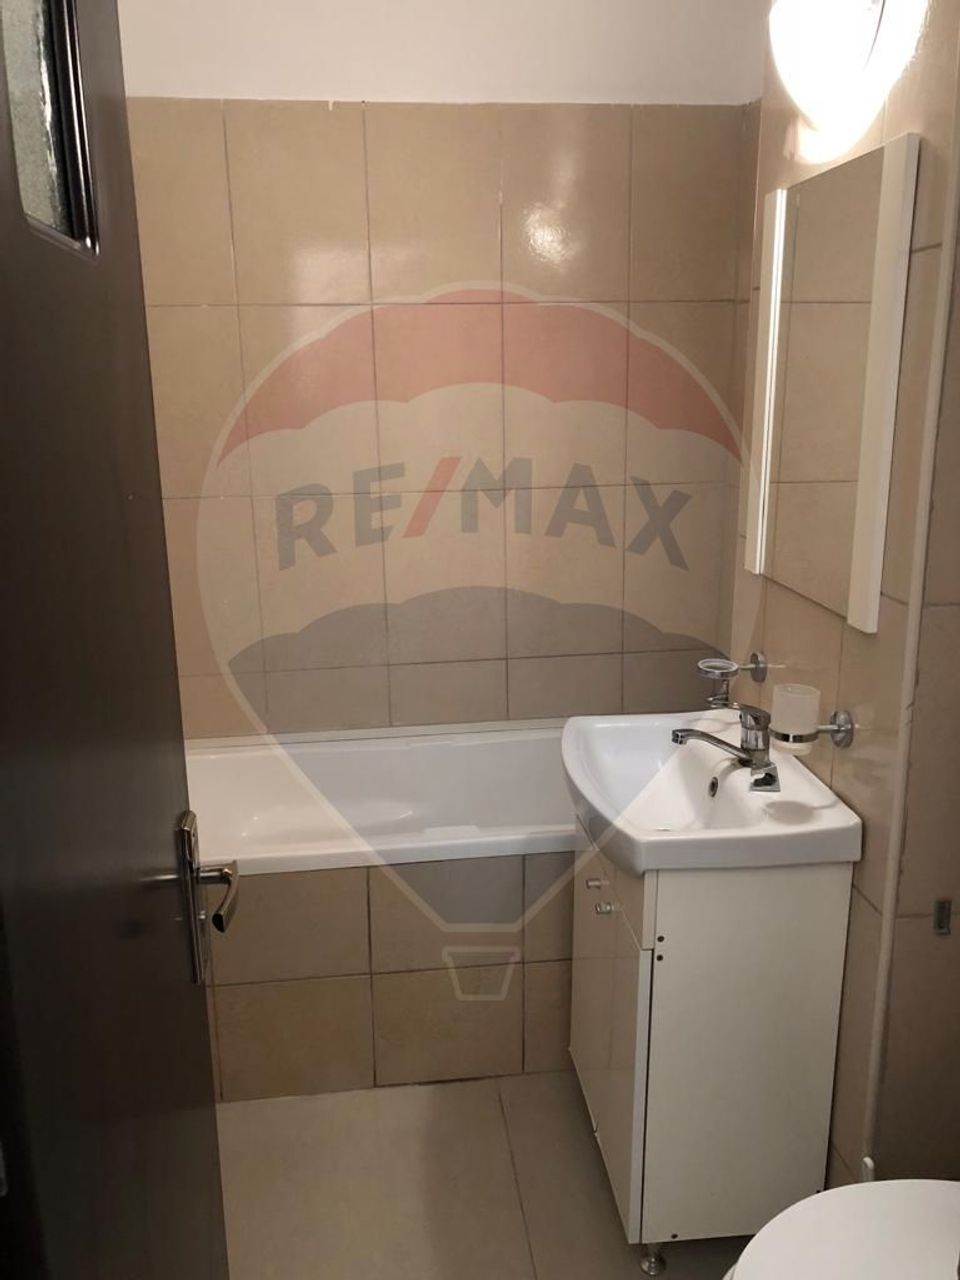 2-room apartment for rent in Baba Novac - Dristor area